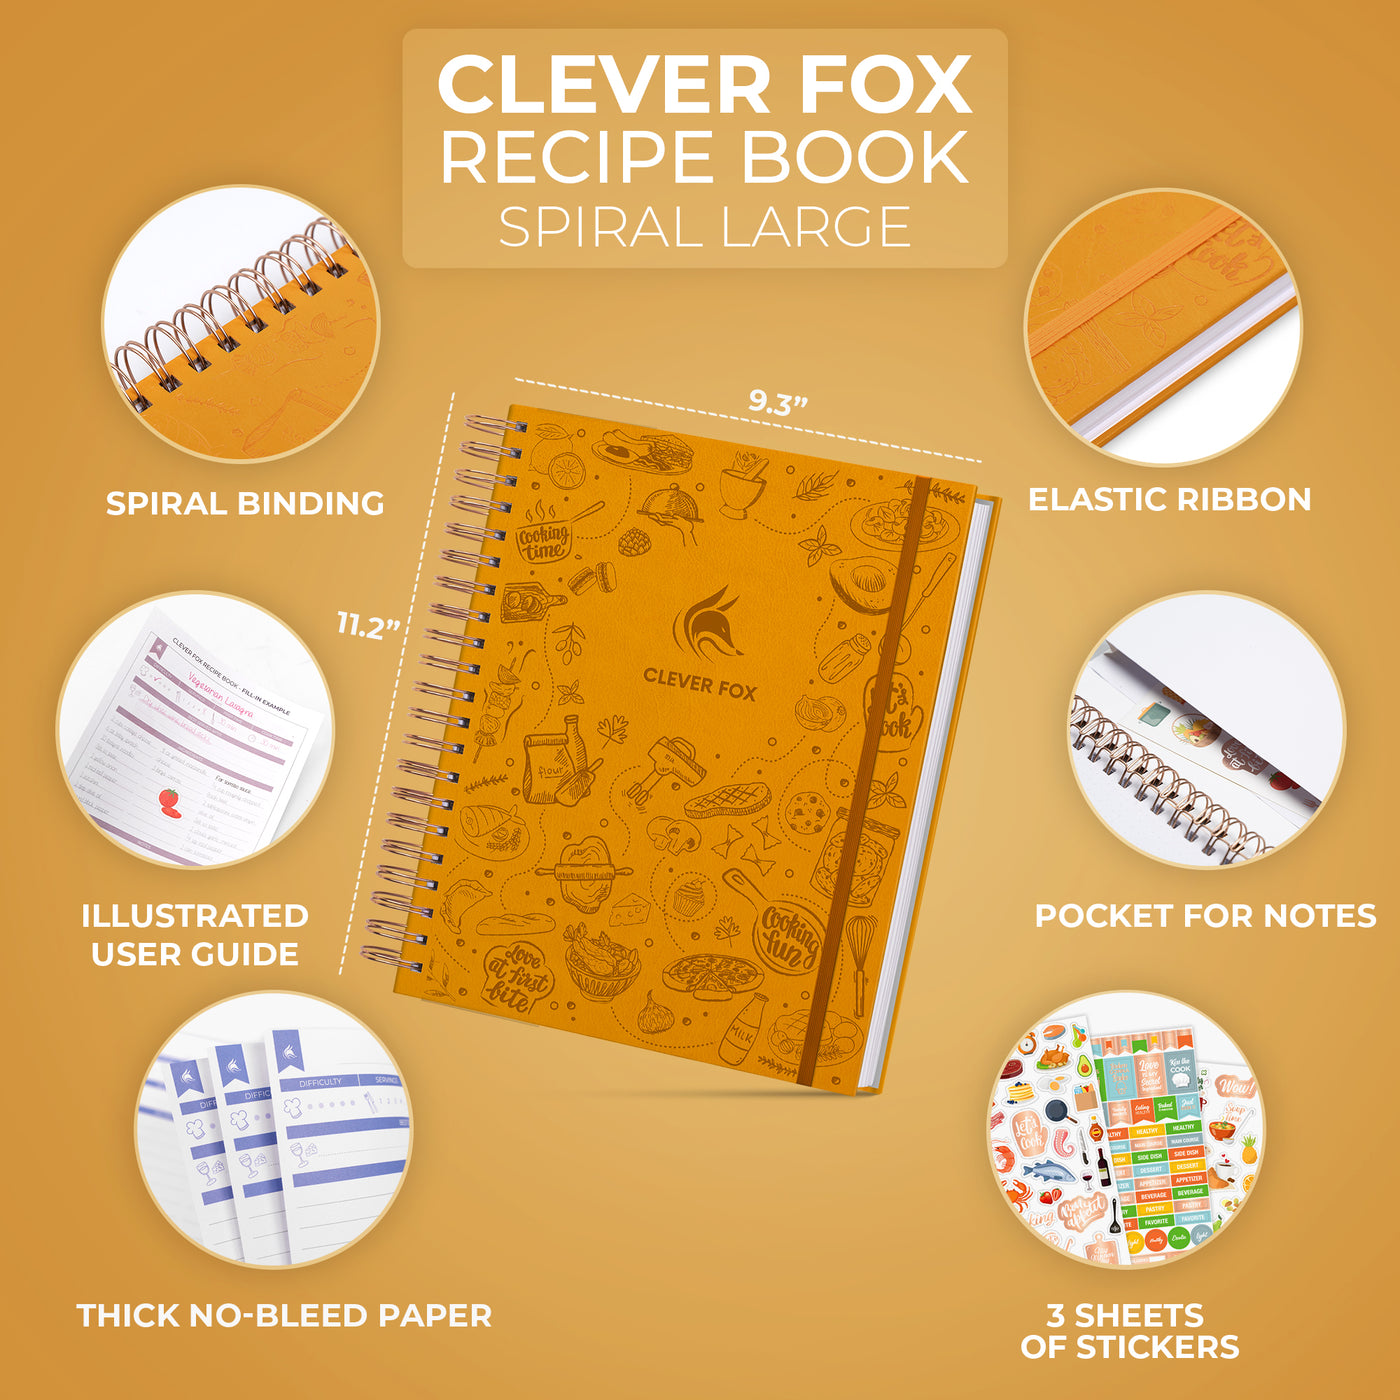 Clever Fox Recipe Book - Make Your Own 